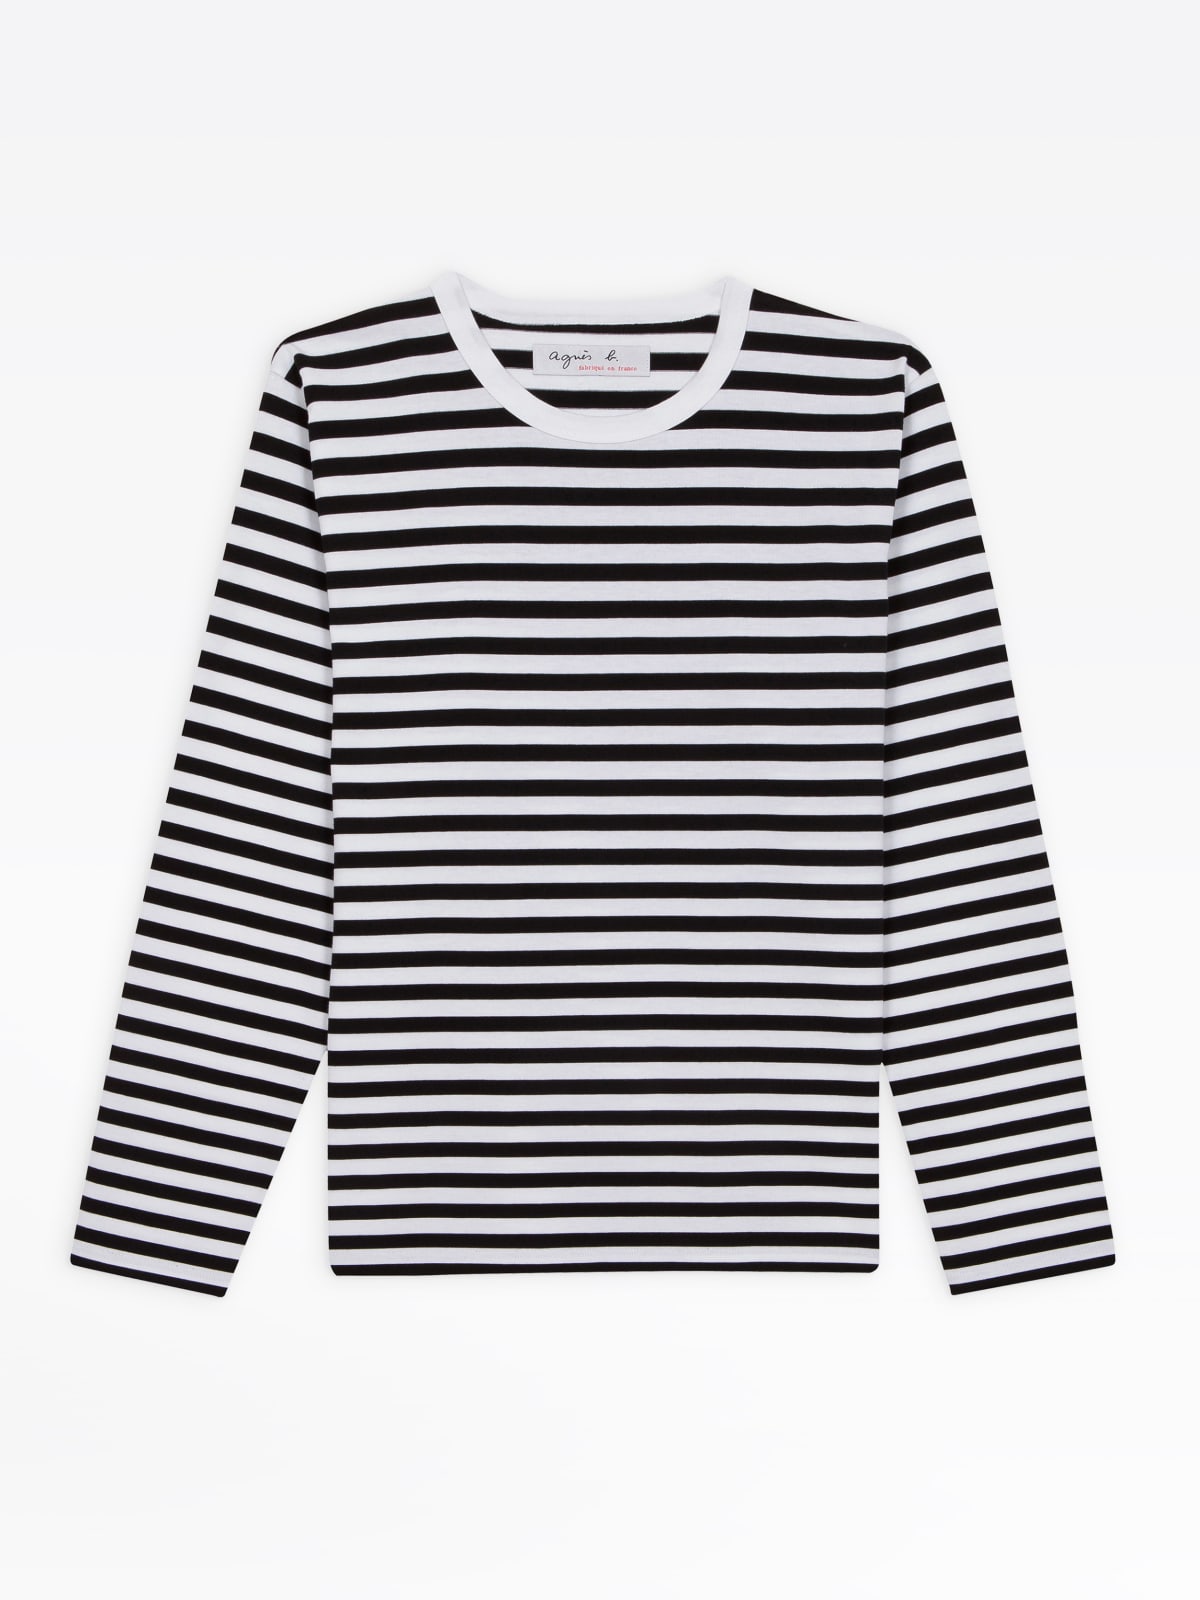 black and white cotton Coulos 12/12 striped t-shirt